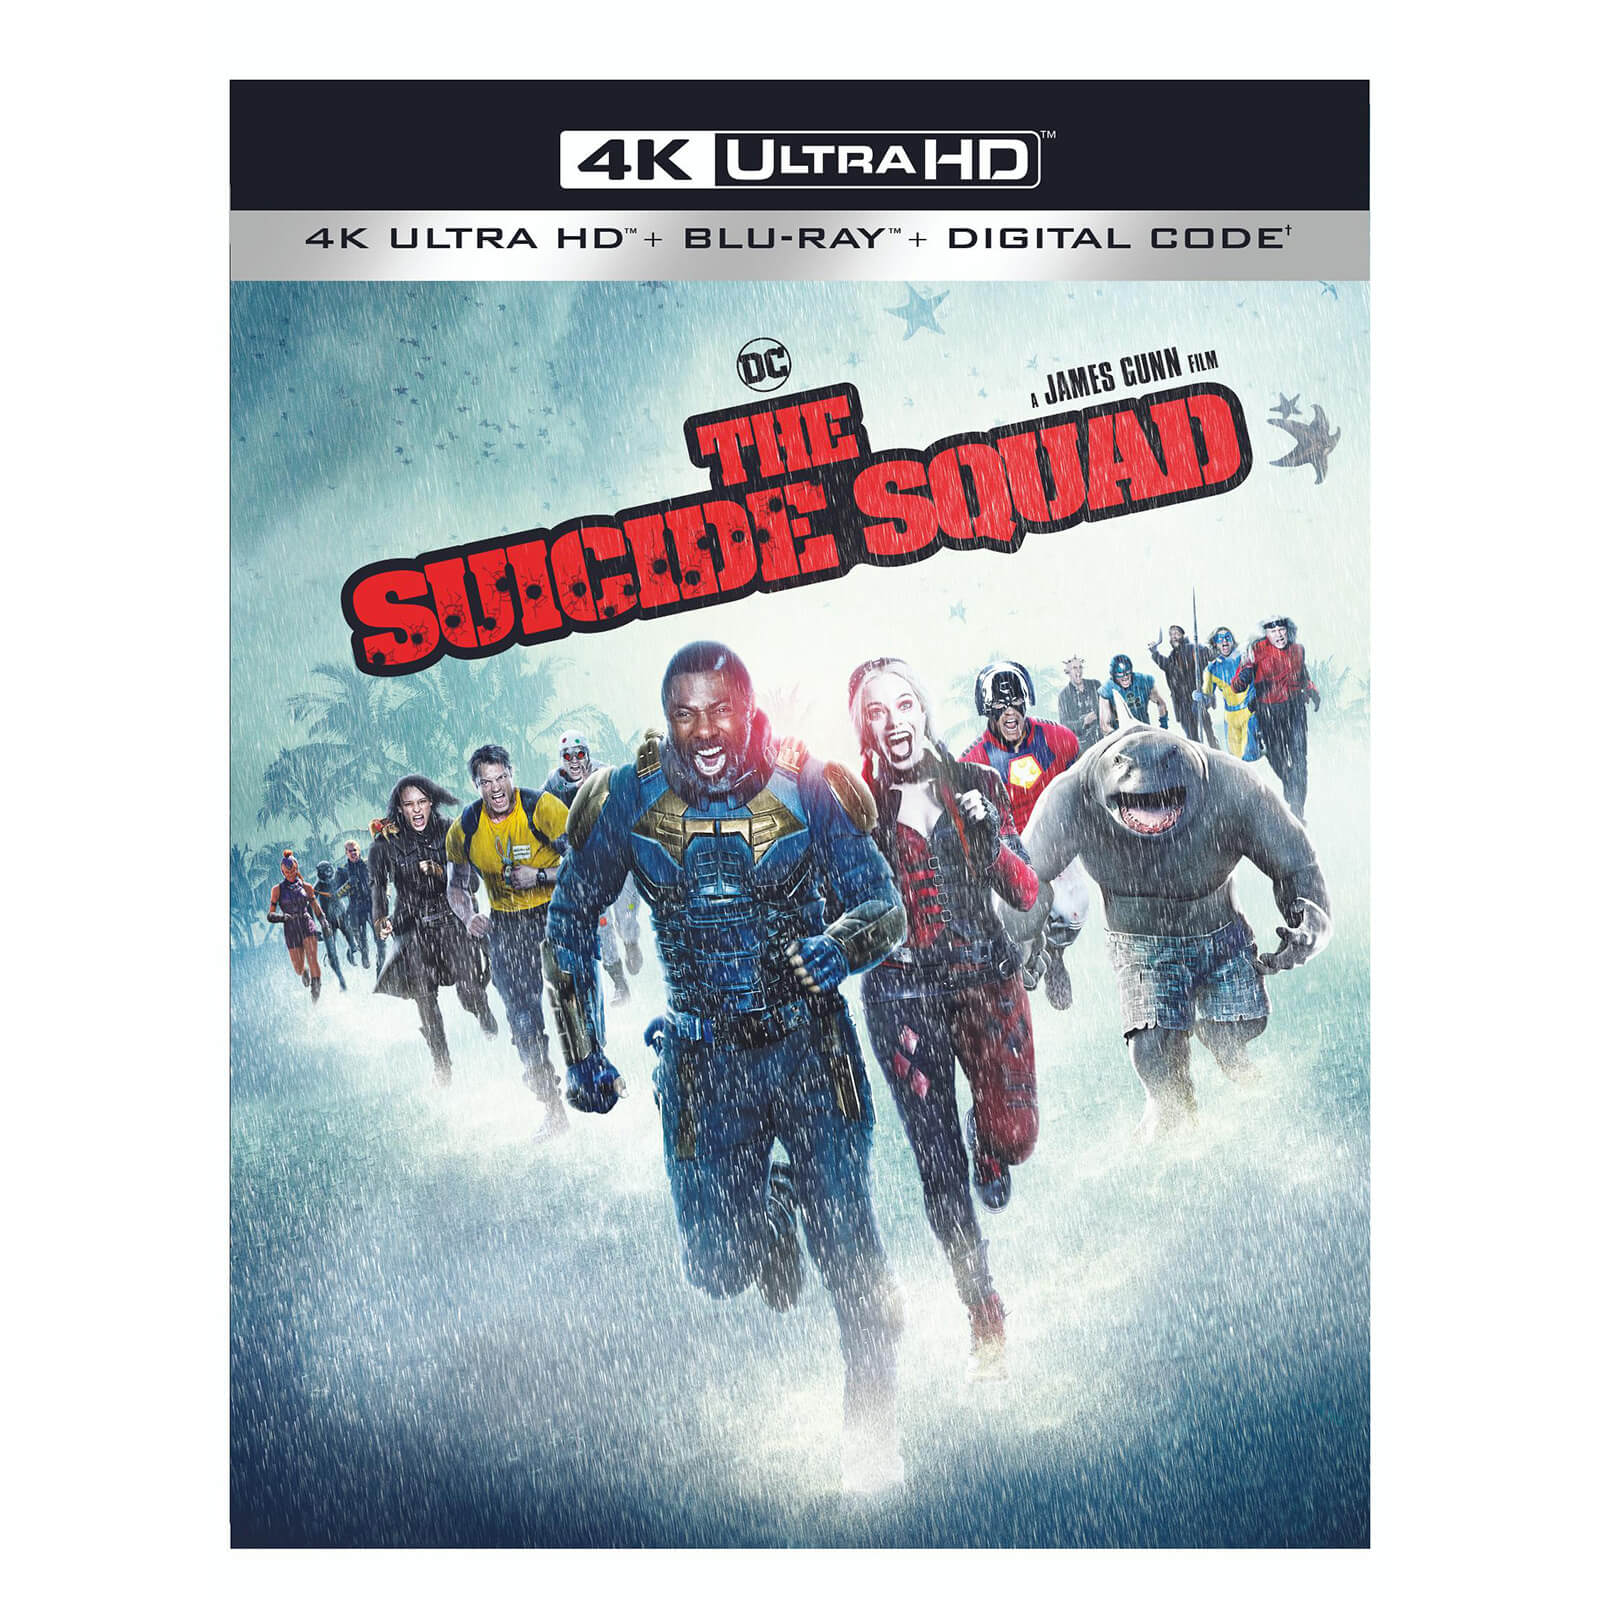 The Suicide Squad - 4K Ultra HD (Includes Blu-ray) (US Import)